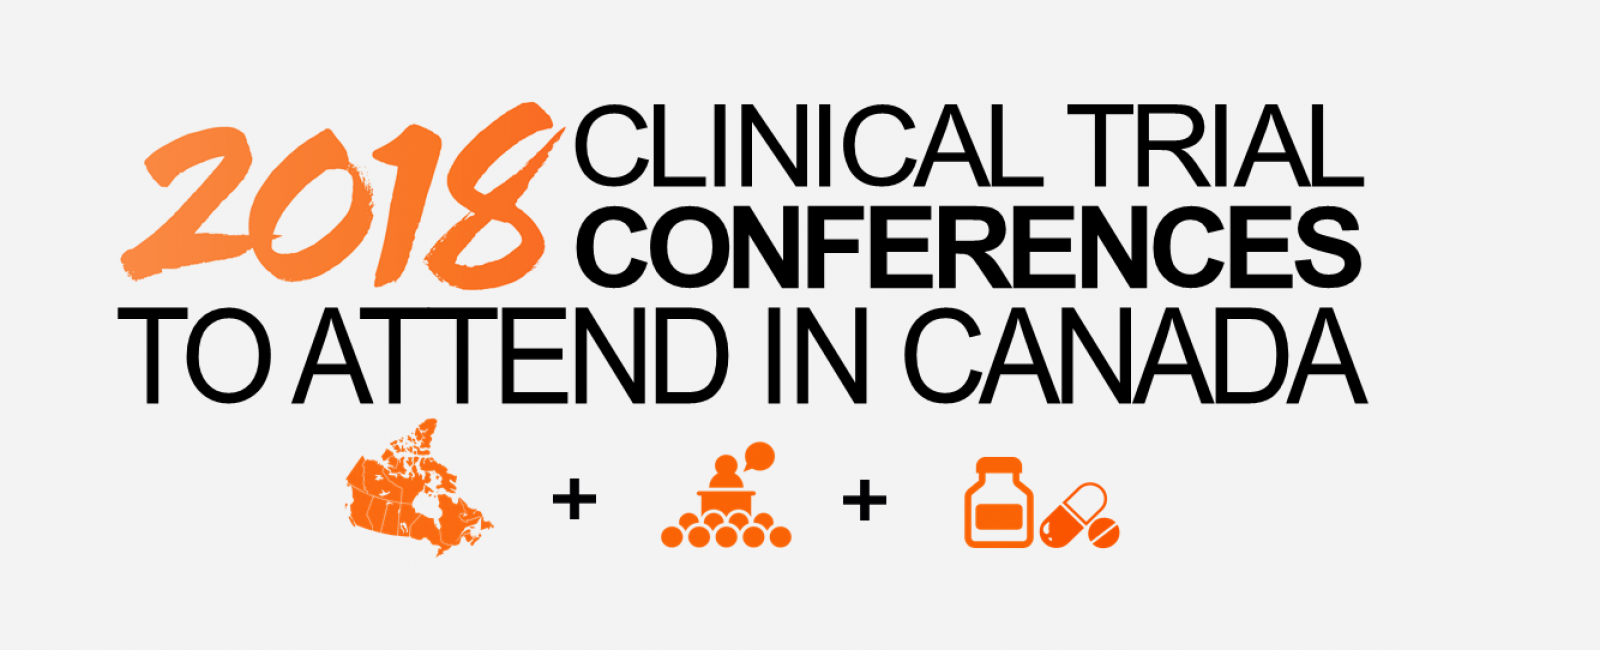 Top 2018 Clinical Trial Conferences to attend in Canada